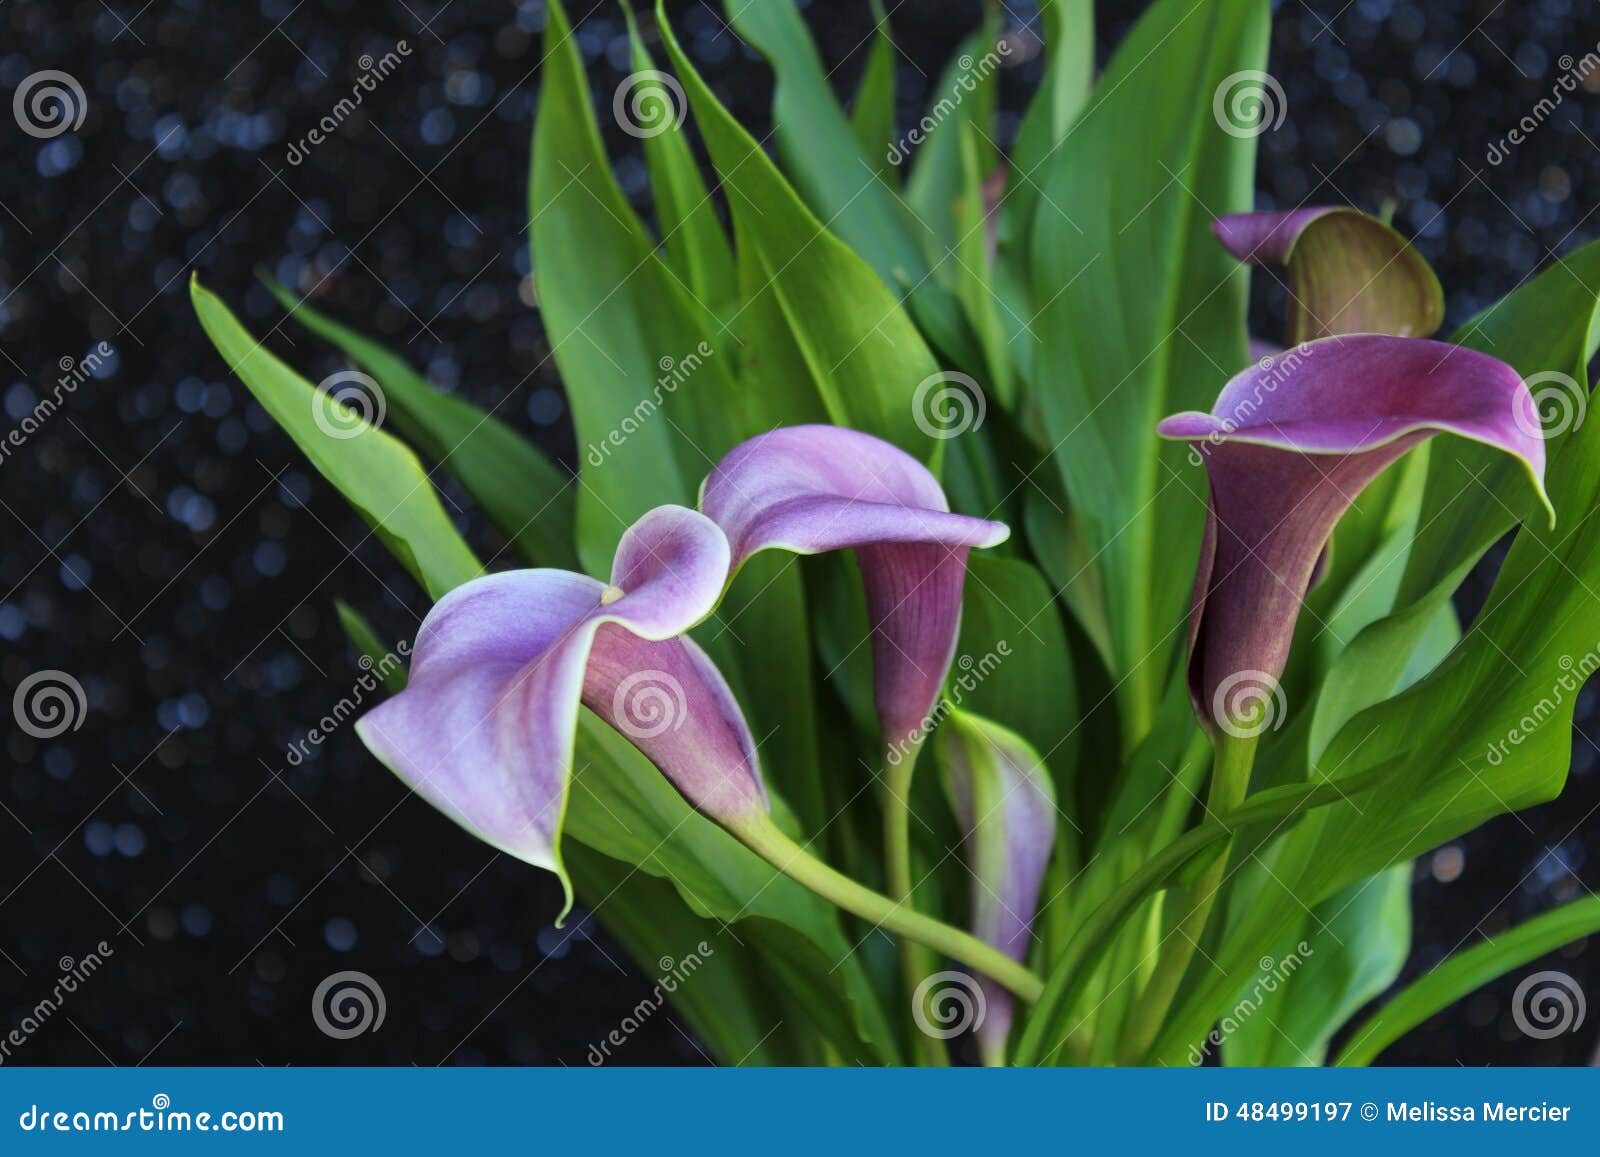 Bouquet of Purple Calla Lilies Stock Image - Image of green, fresh ...